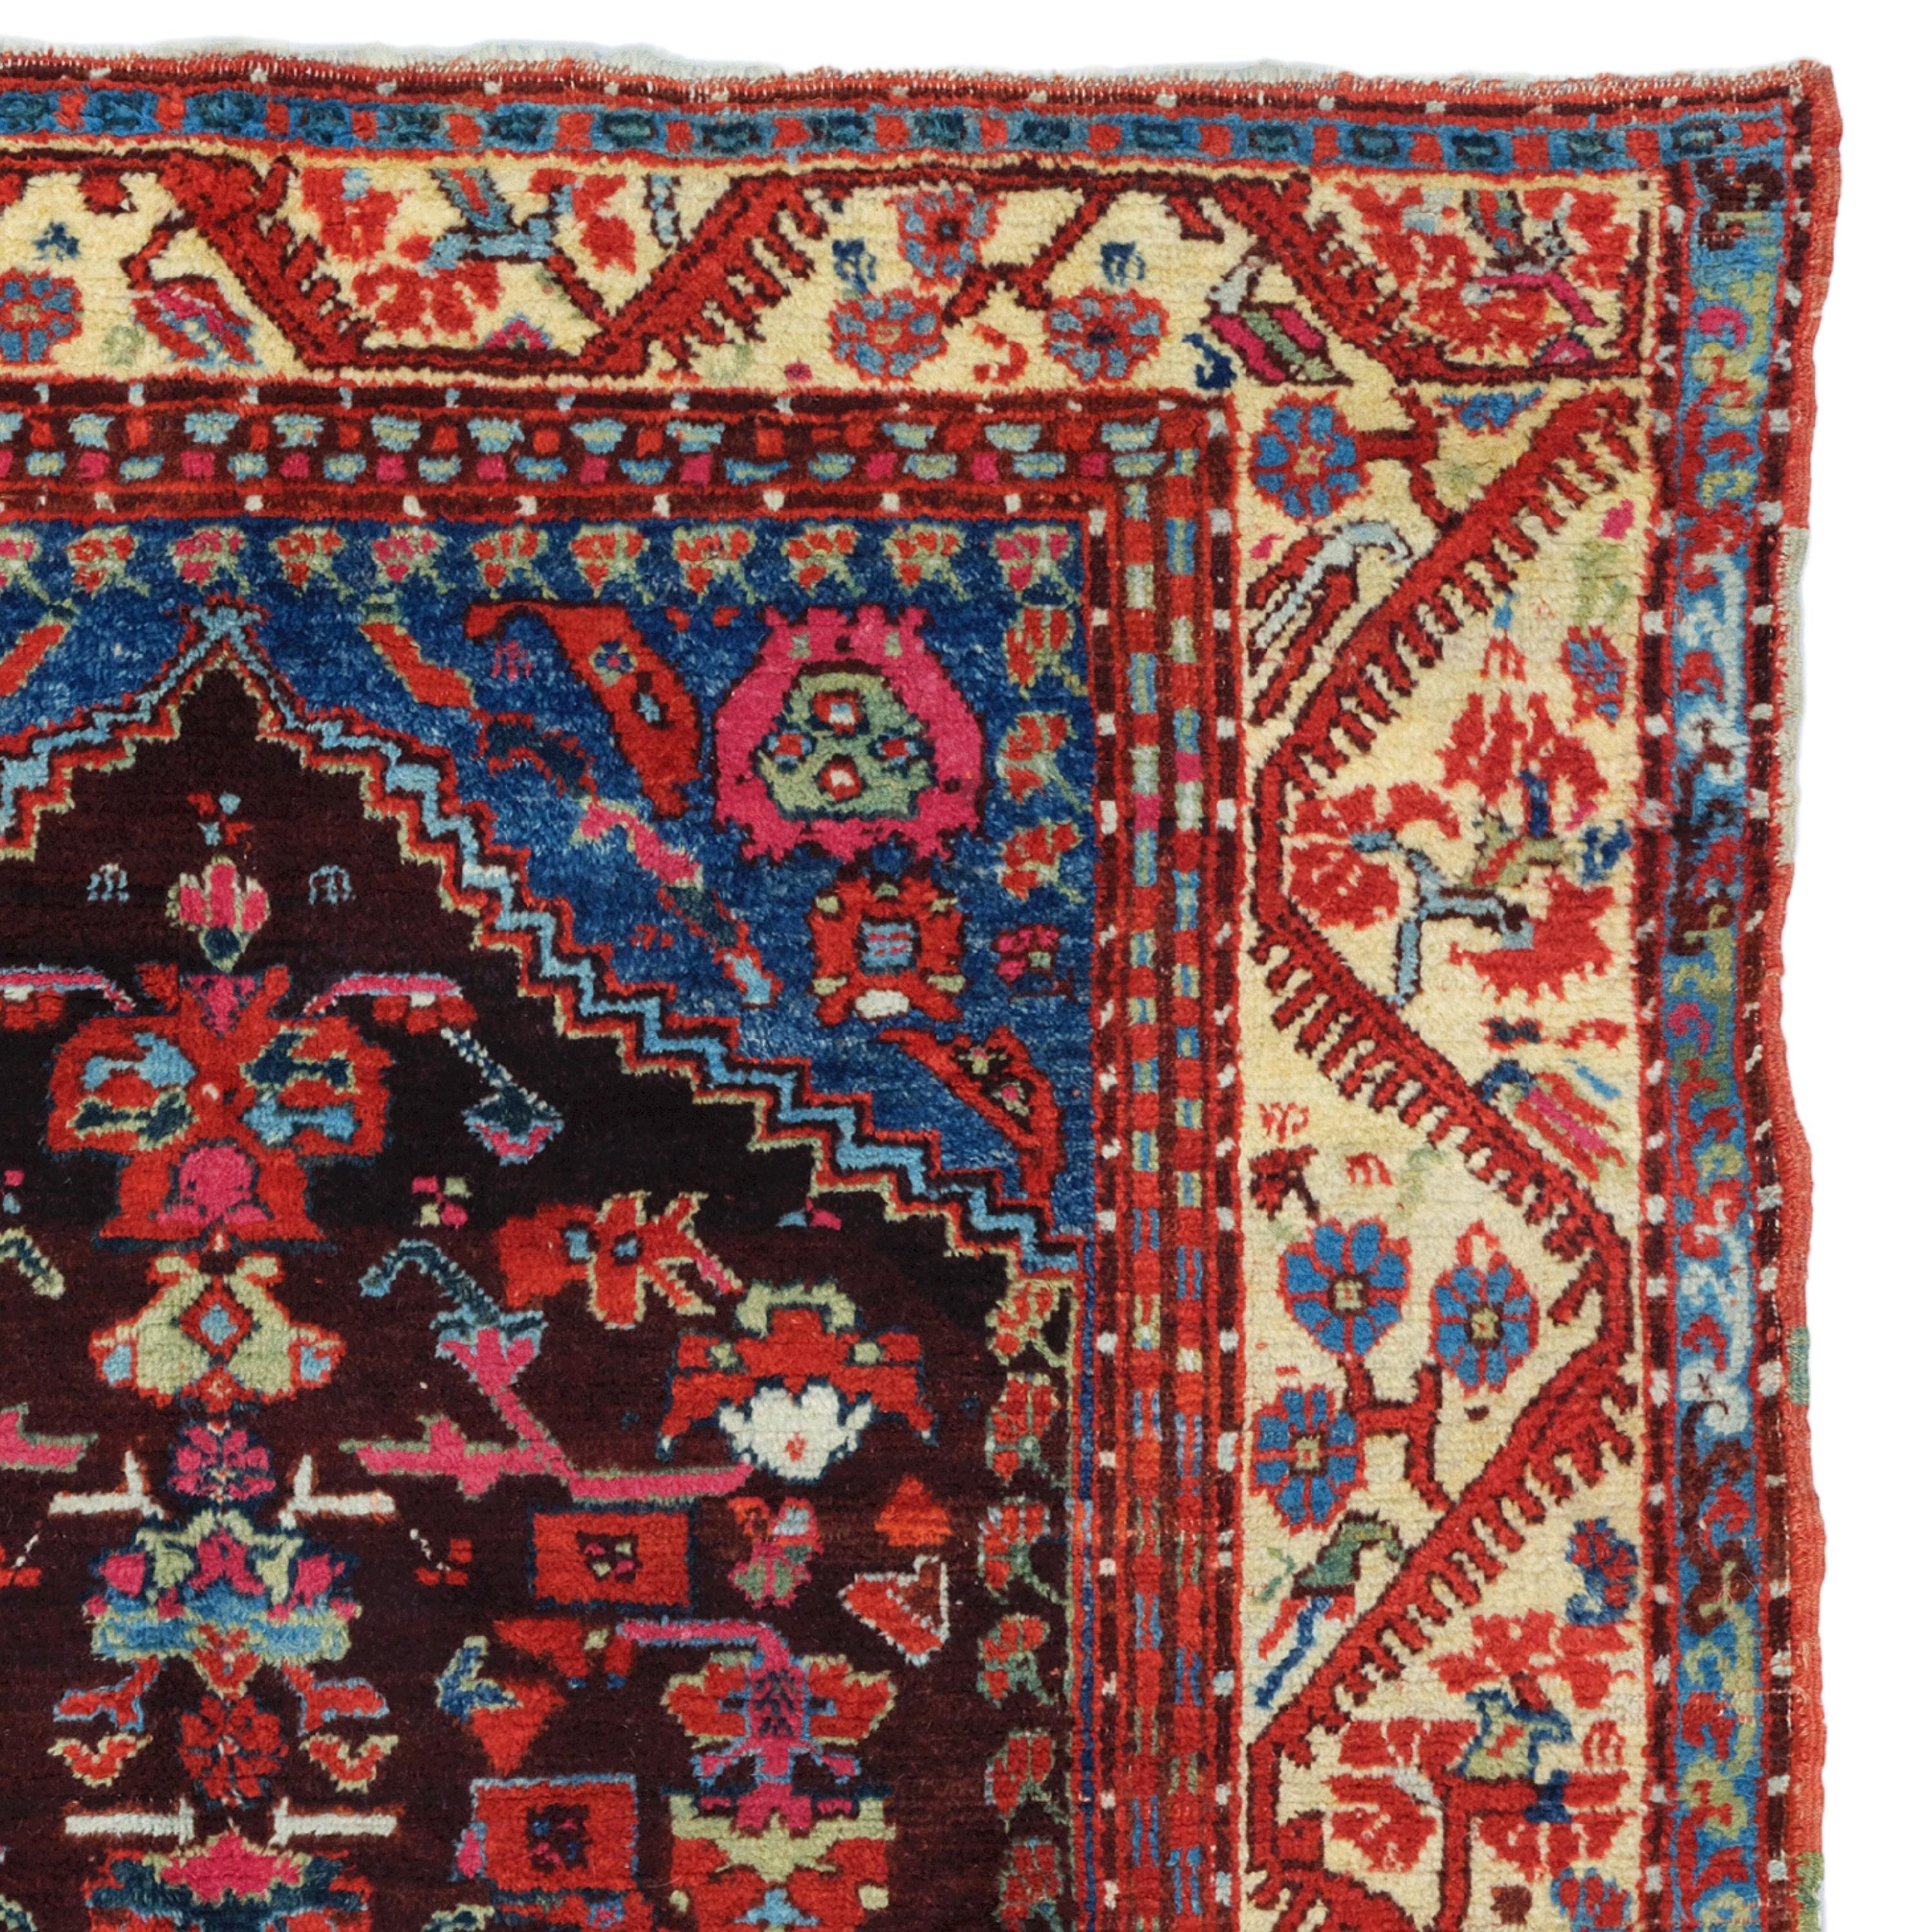 Wool Middle Of The 19th Century Anatolian Kula Rug - Antique Turkish Rug For Sale